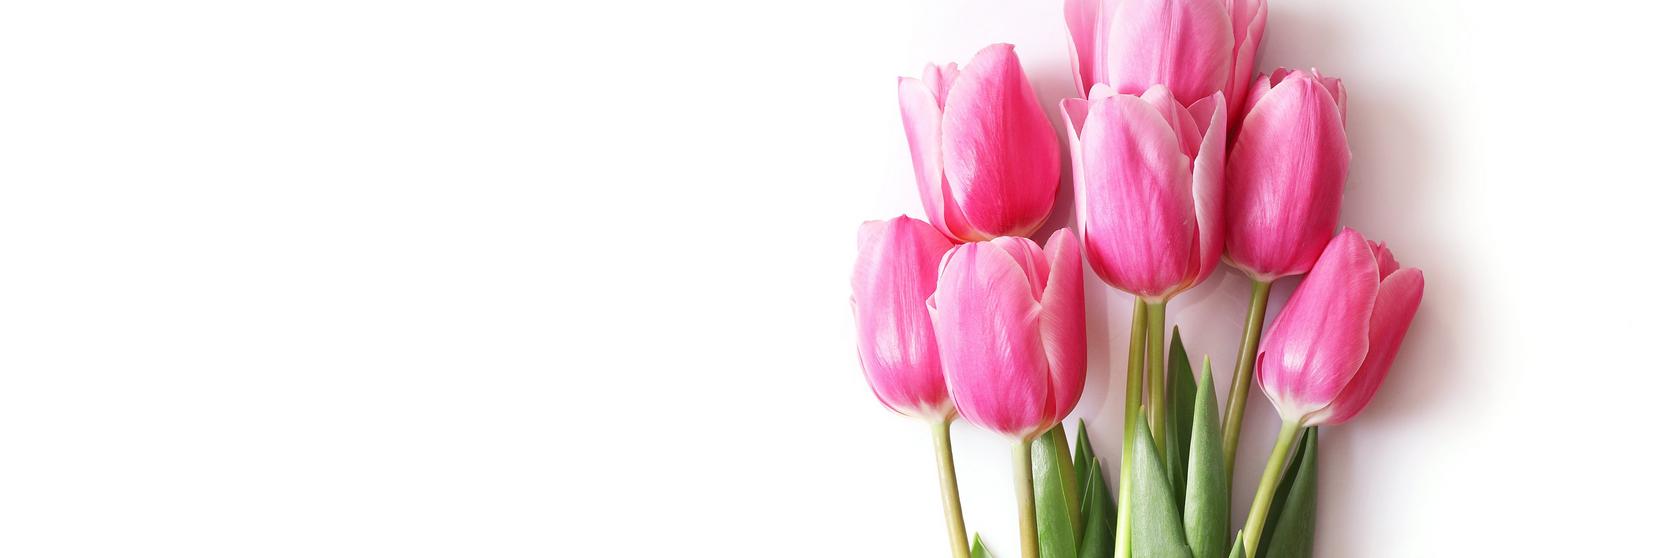 Ultimate Flower Guide: Tulips, Tips & Facts | Interflora